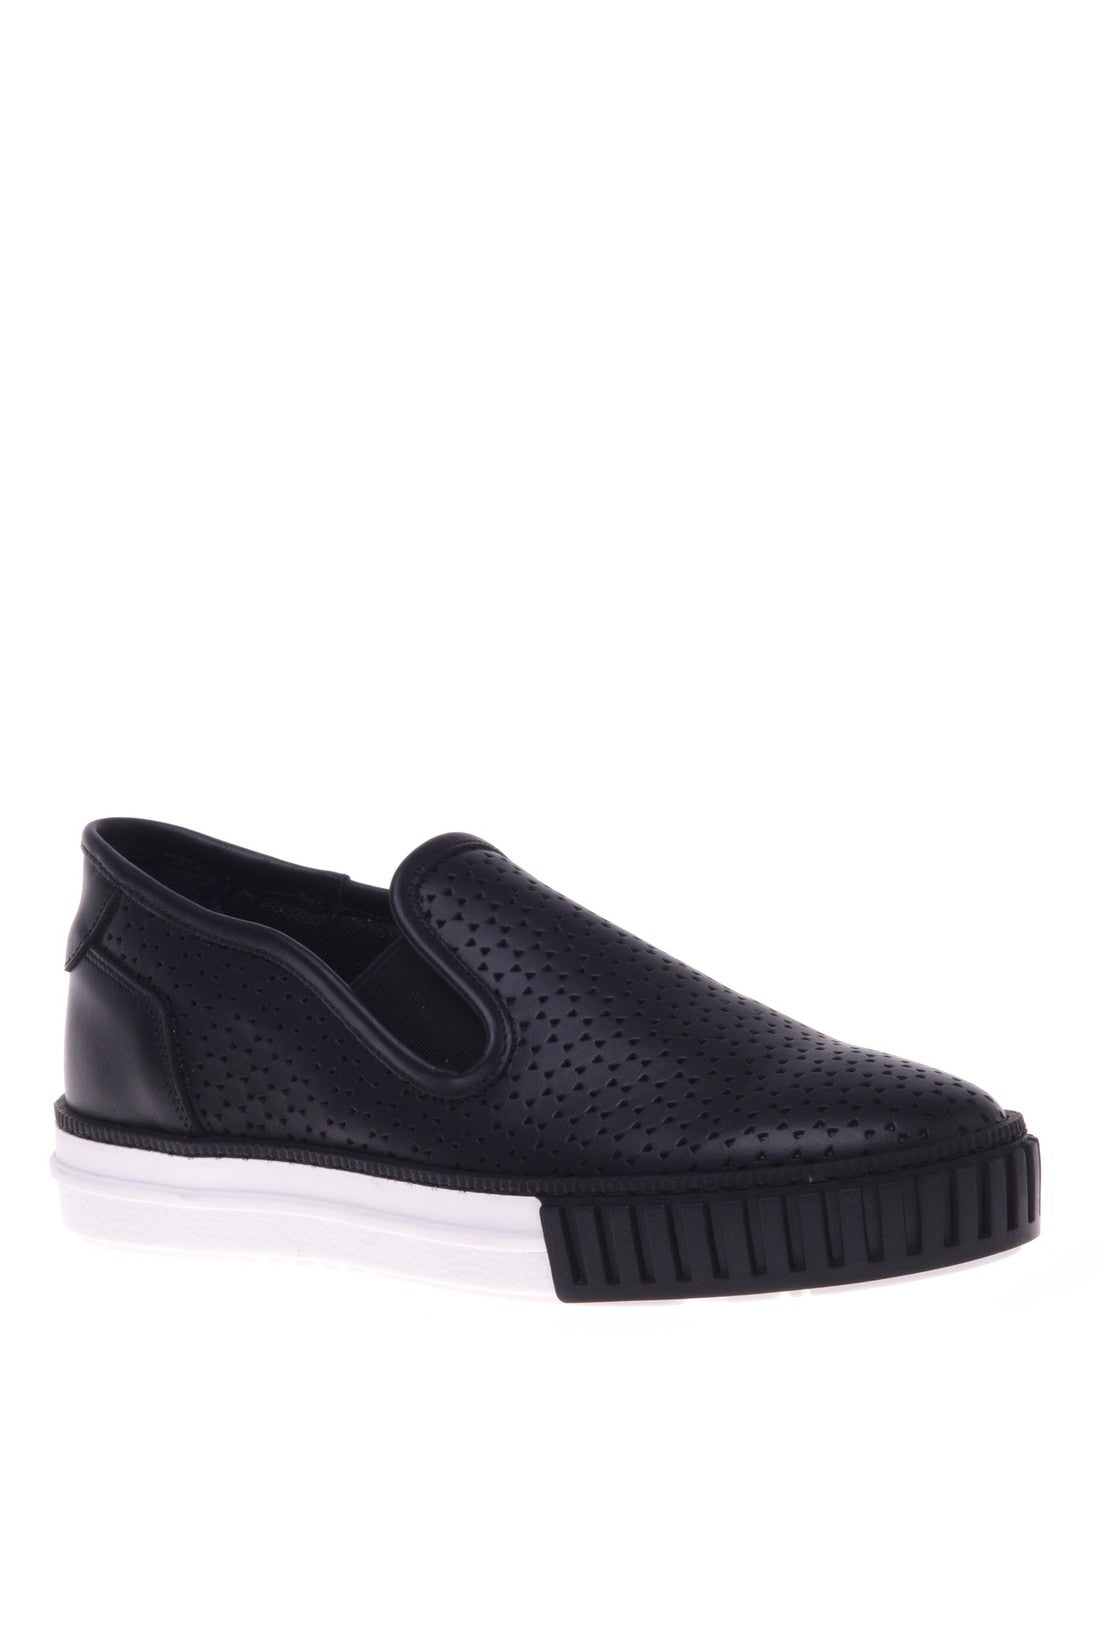 Loafer in black perforated nappa leather